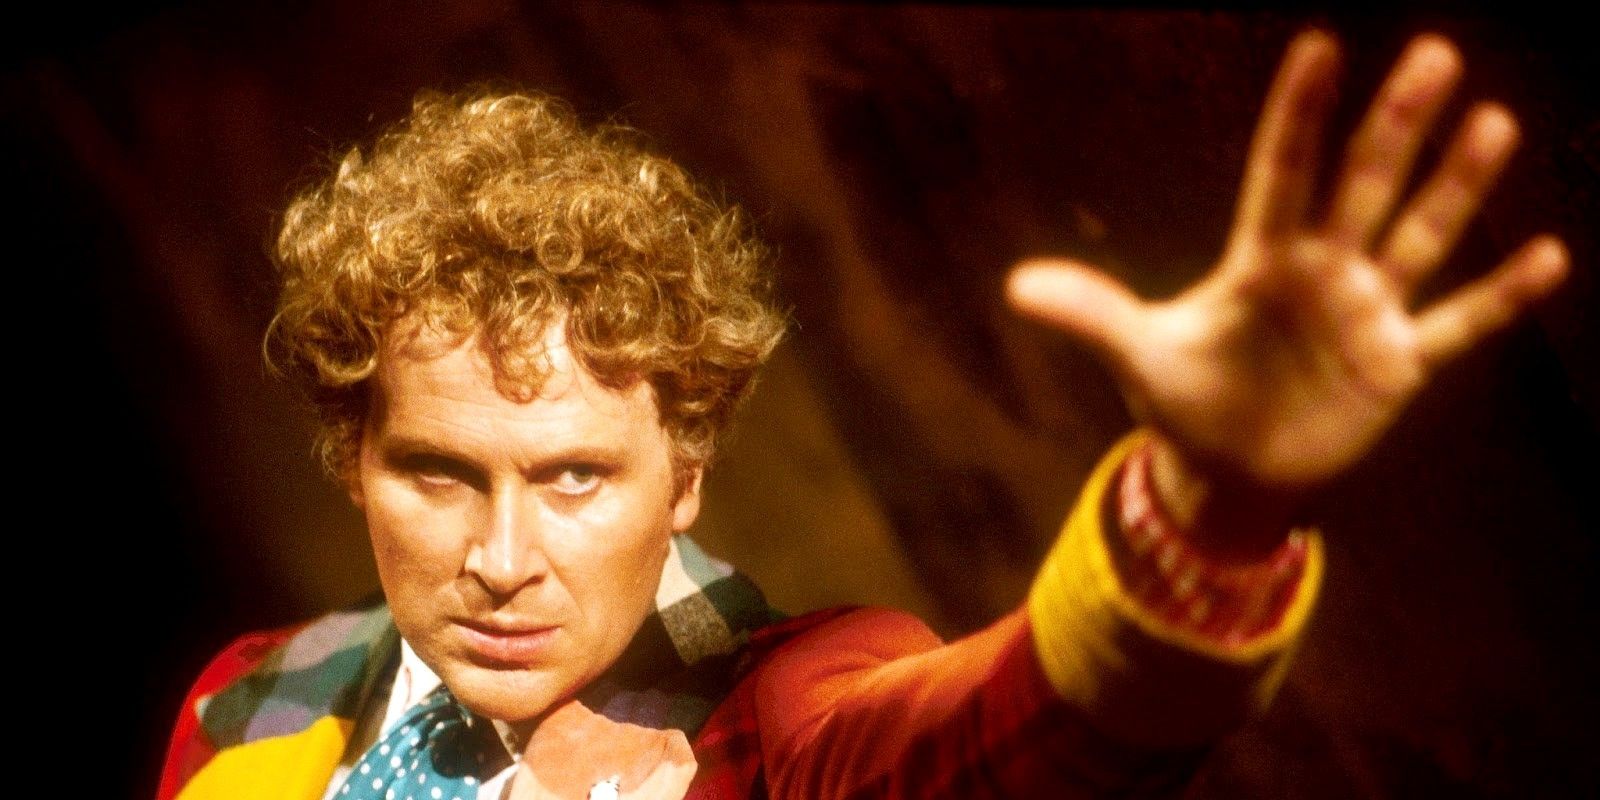 The Sixth Doctor with his arm reaching out in Doctor Who